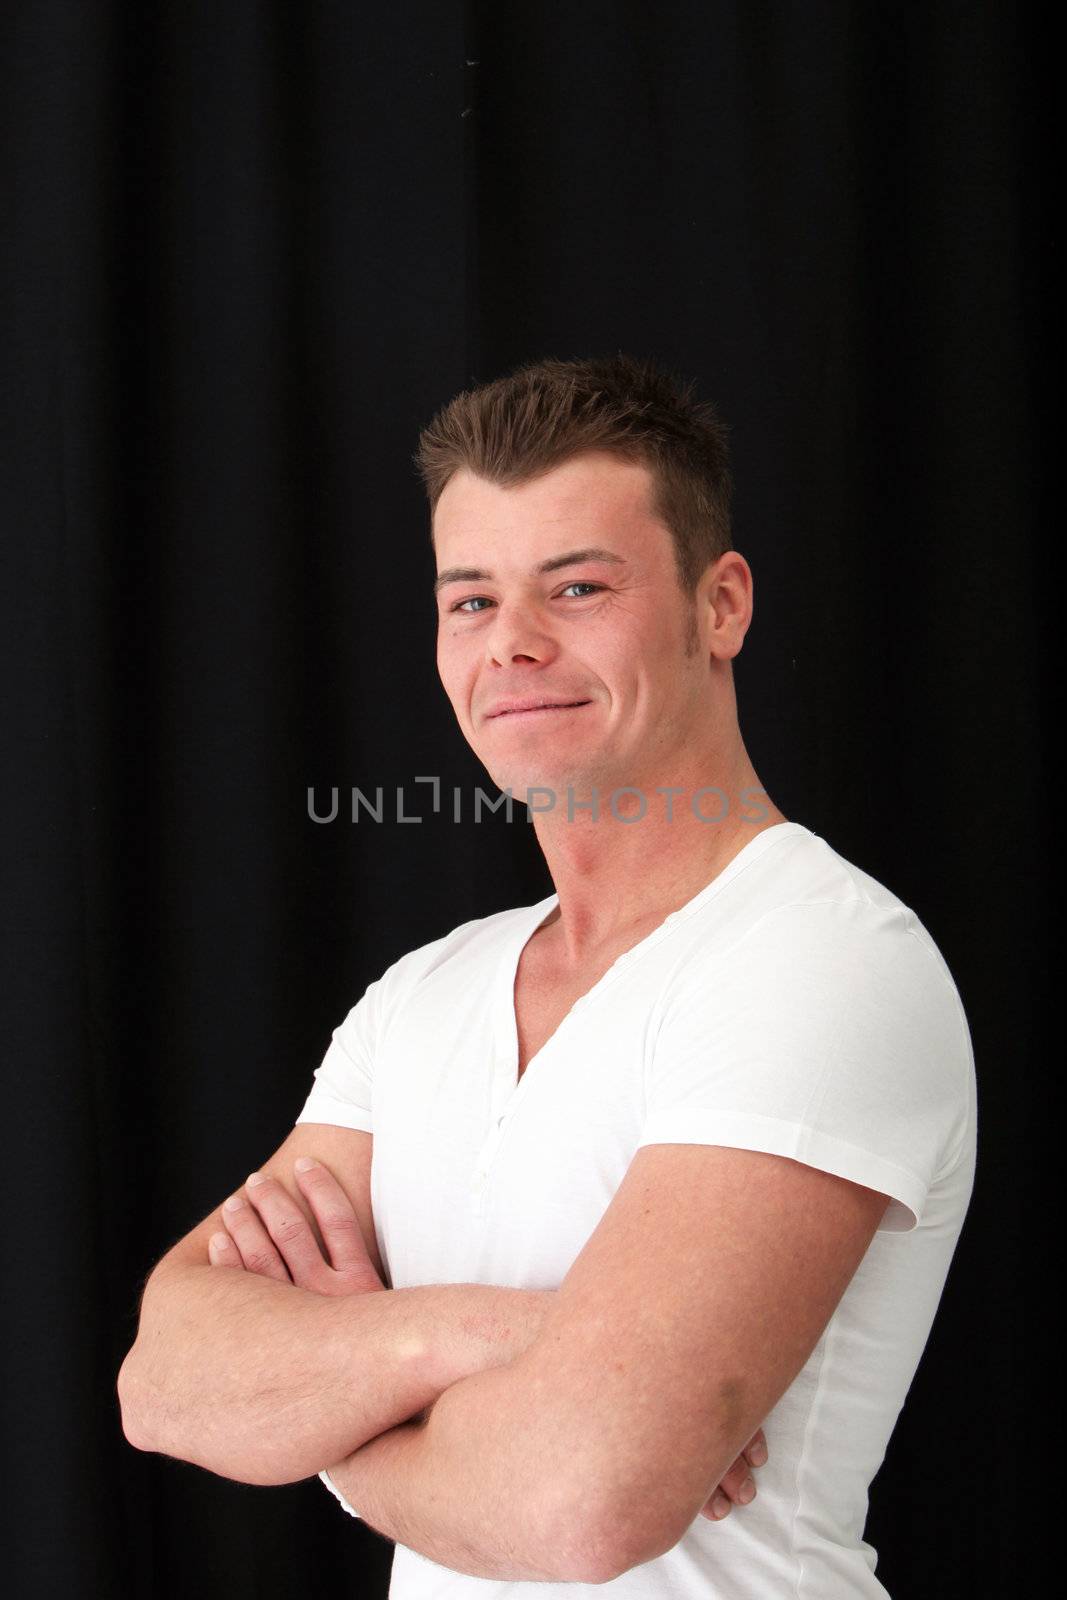 Handsome man posing with arm crossed over the black background